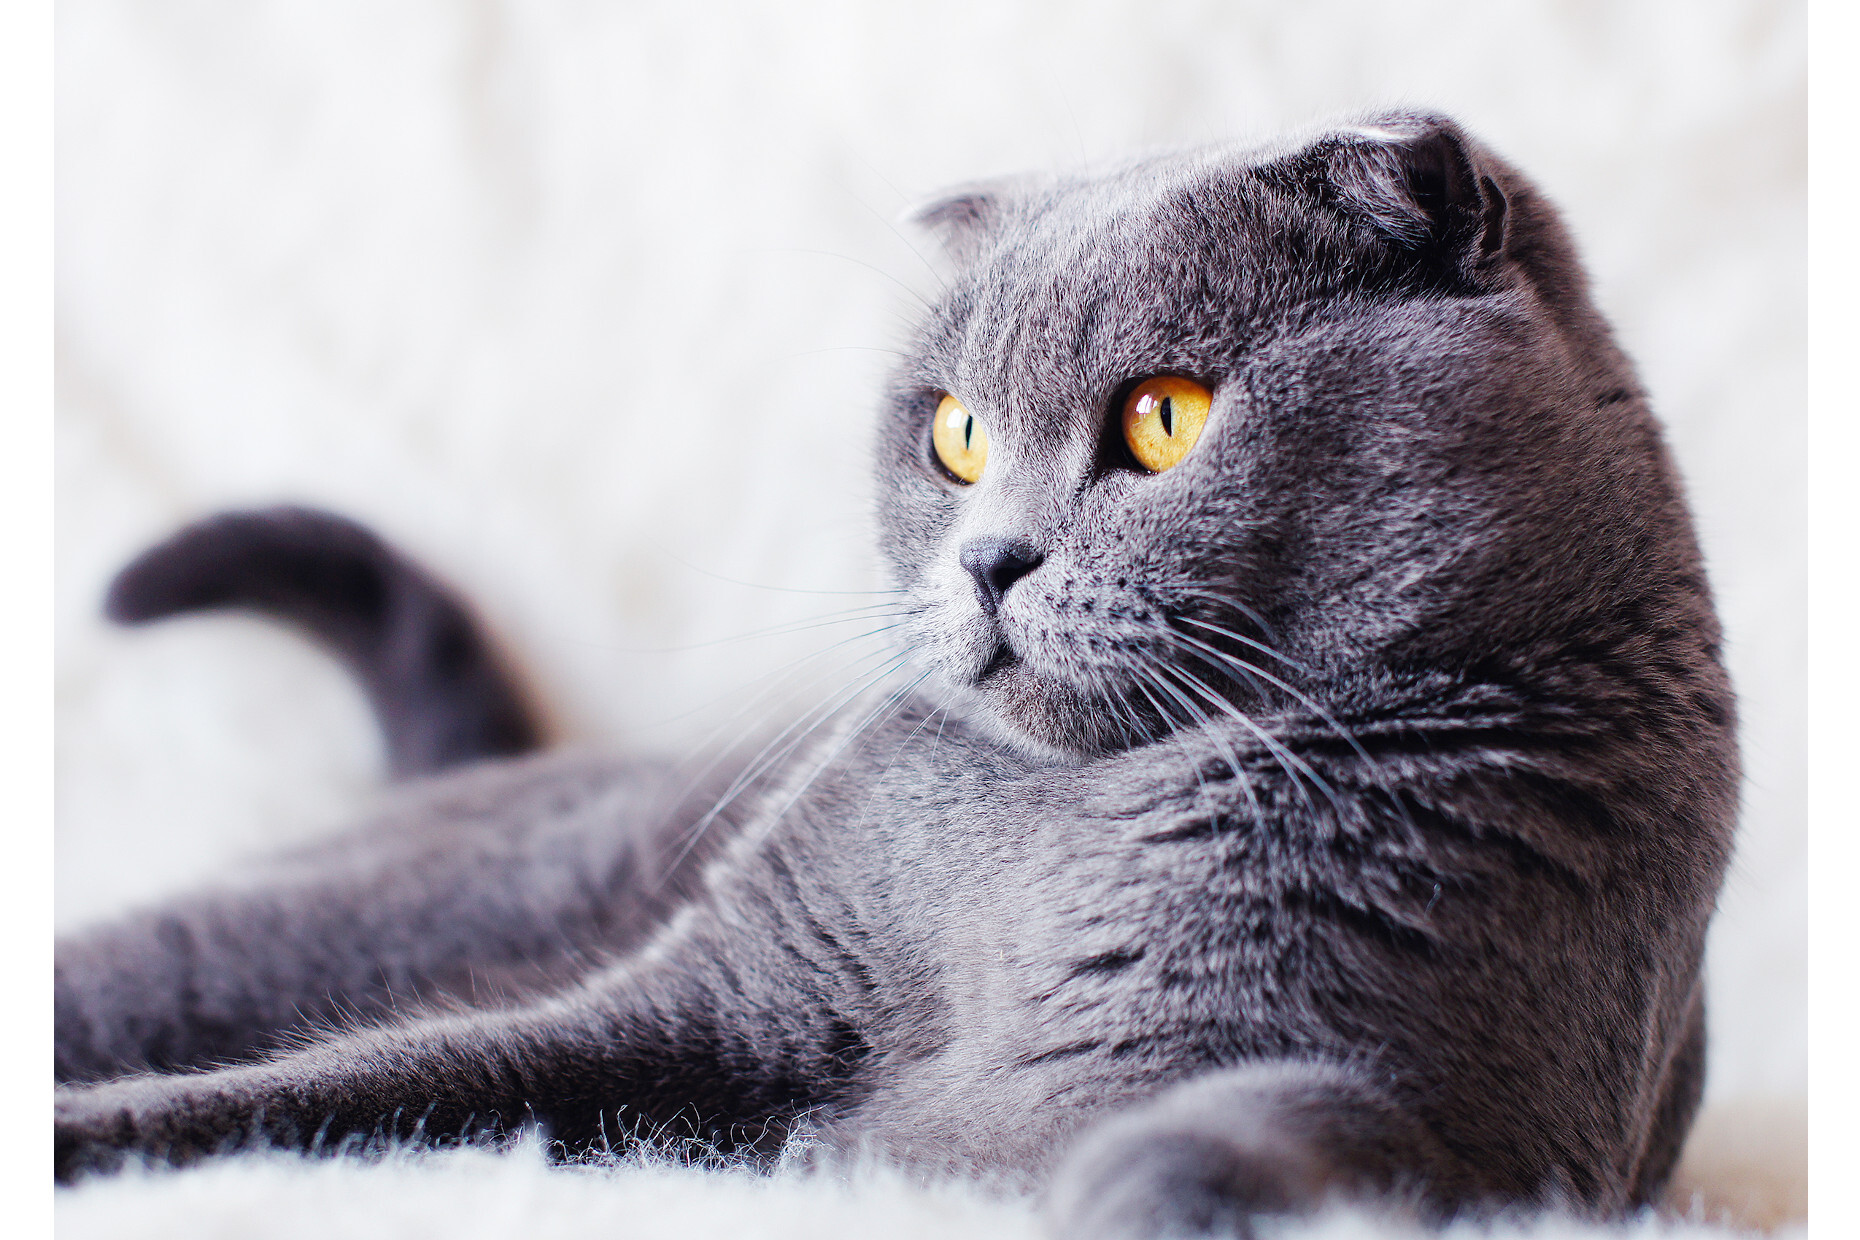 The 20 most unusual cat breeds